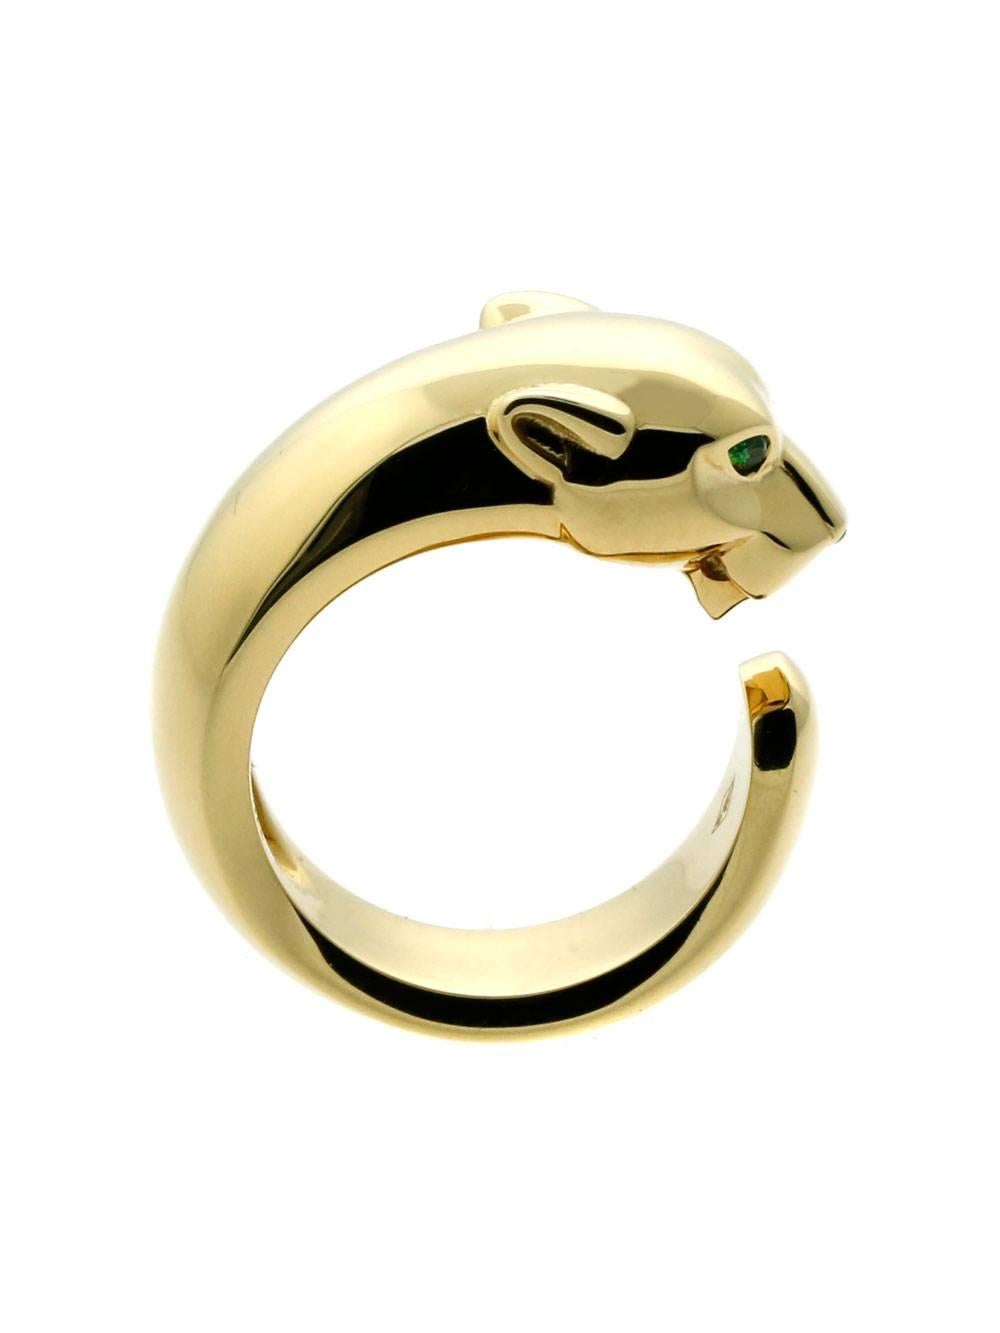 With its animalistic attitude and emerald green eyes, the Cartier Panthere Head Ring will give you confidence the second you slide it onto your finger. The panther’s ears are tipped back showing its growly side while the ring’s gentle curves